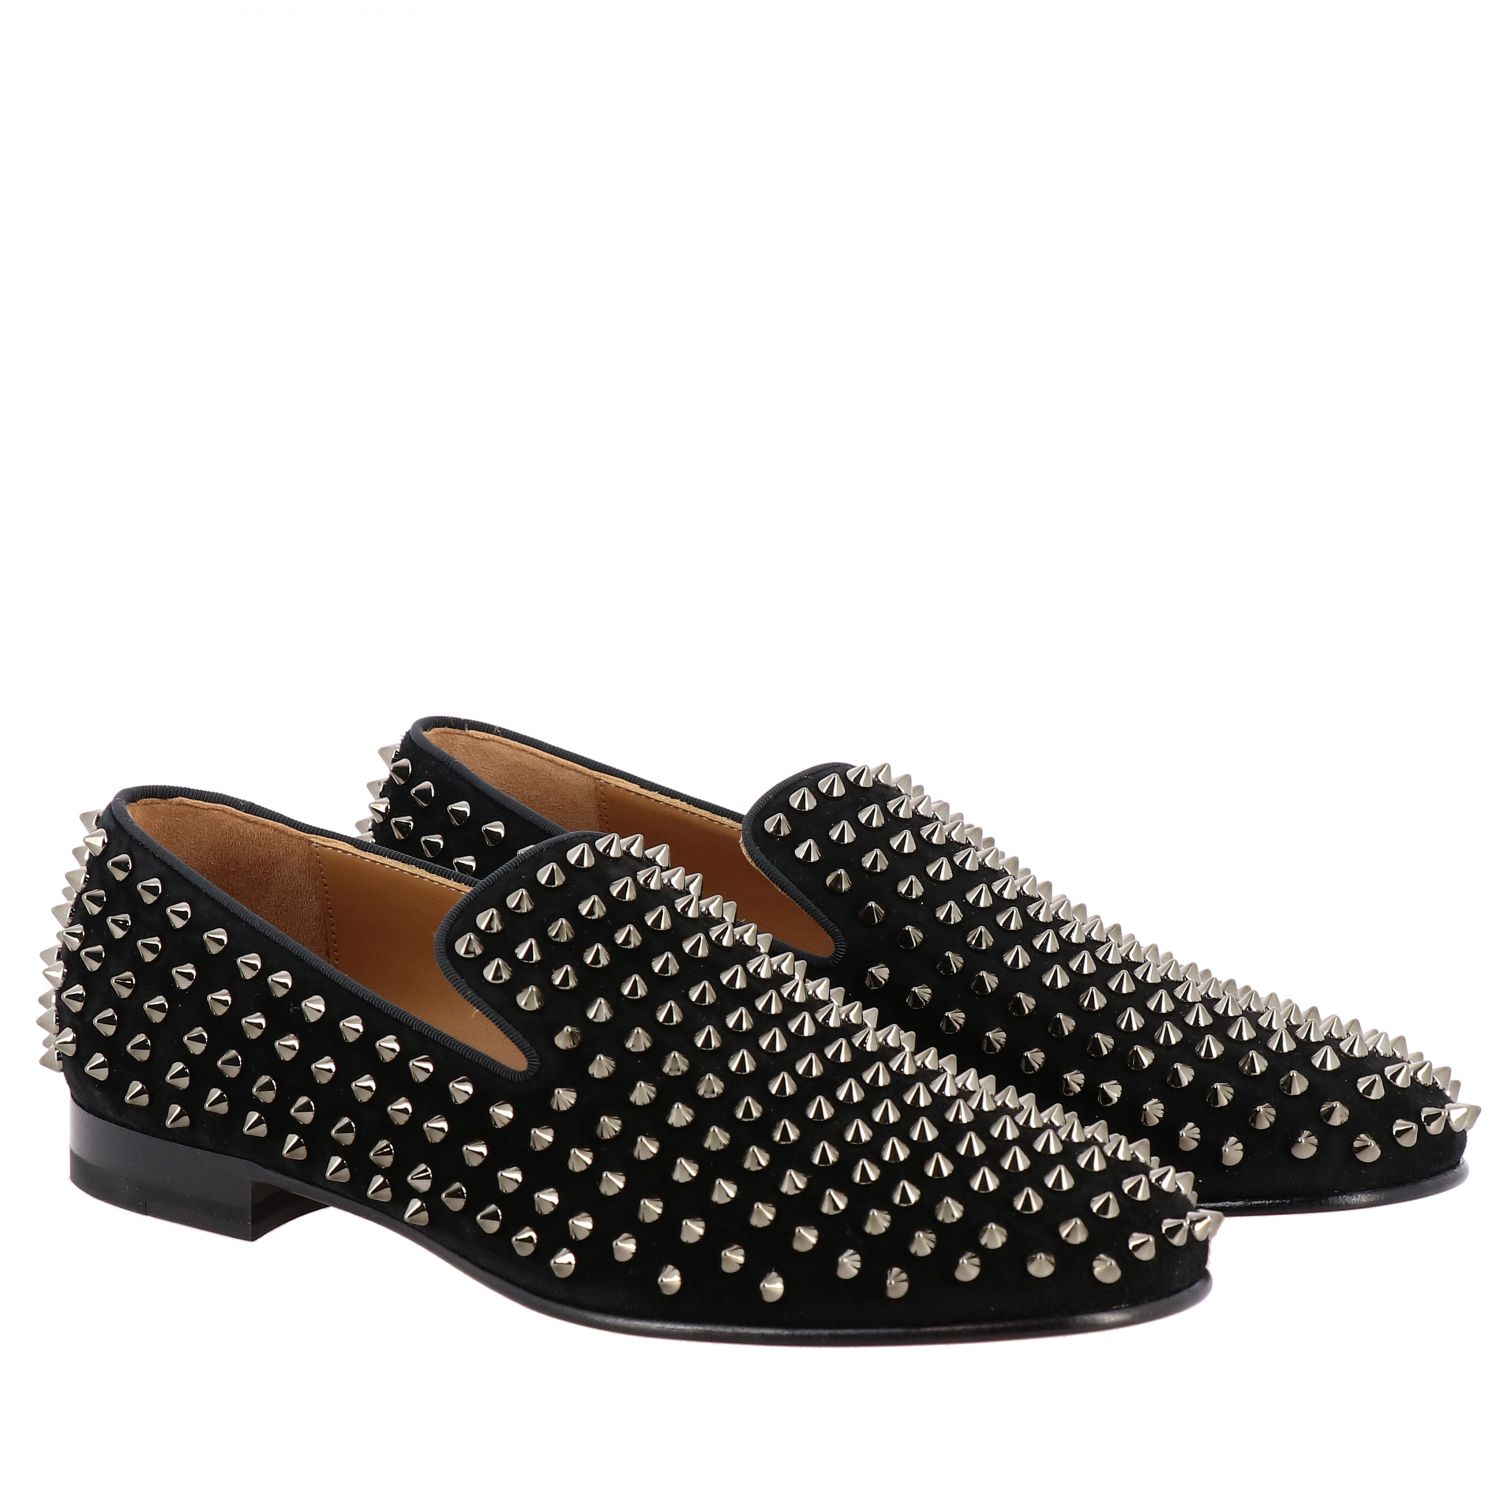 CHRISTIAN LOUBOUTIN: Rollerboy Spikes moccasin in suede with studs | Loafers Christian Louboutin Men Black Loafers Christian 1120153 GIGLIO.COM